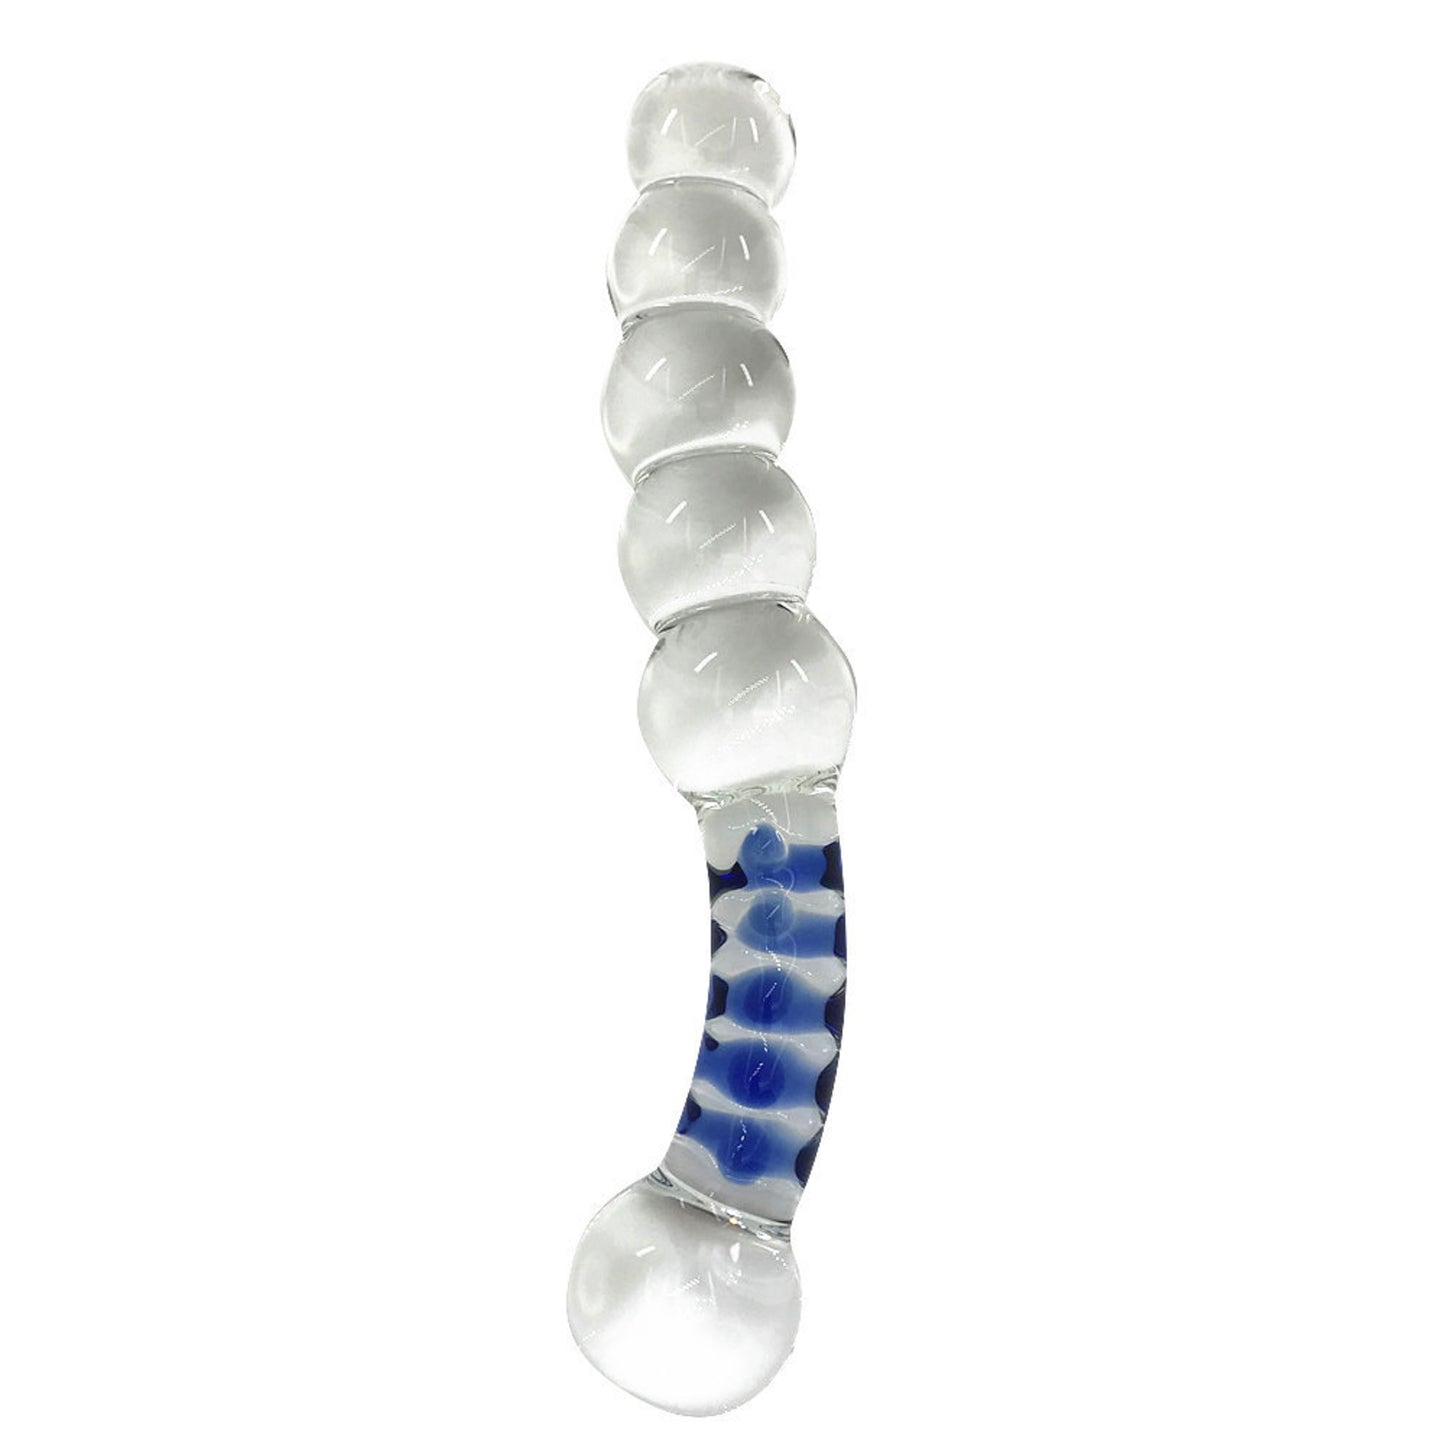 Crystal G-spot Stimulation Double Ended Glass Dildo with Blue Spots Handle